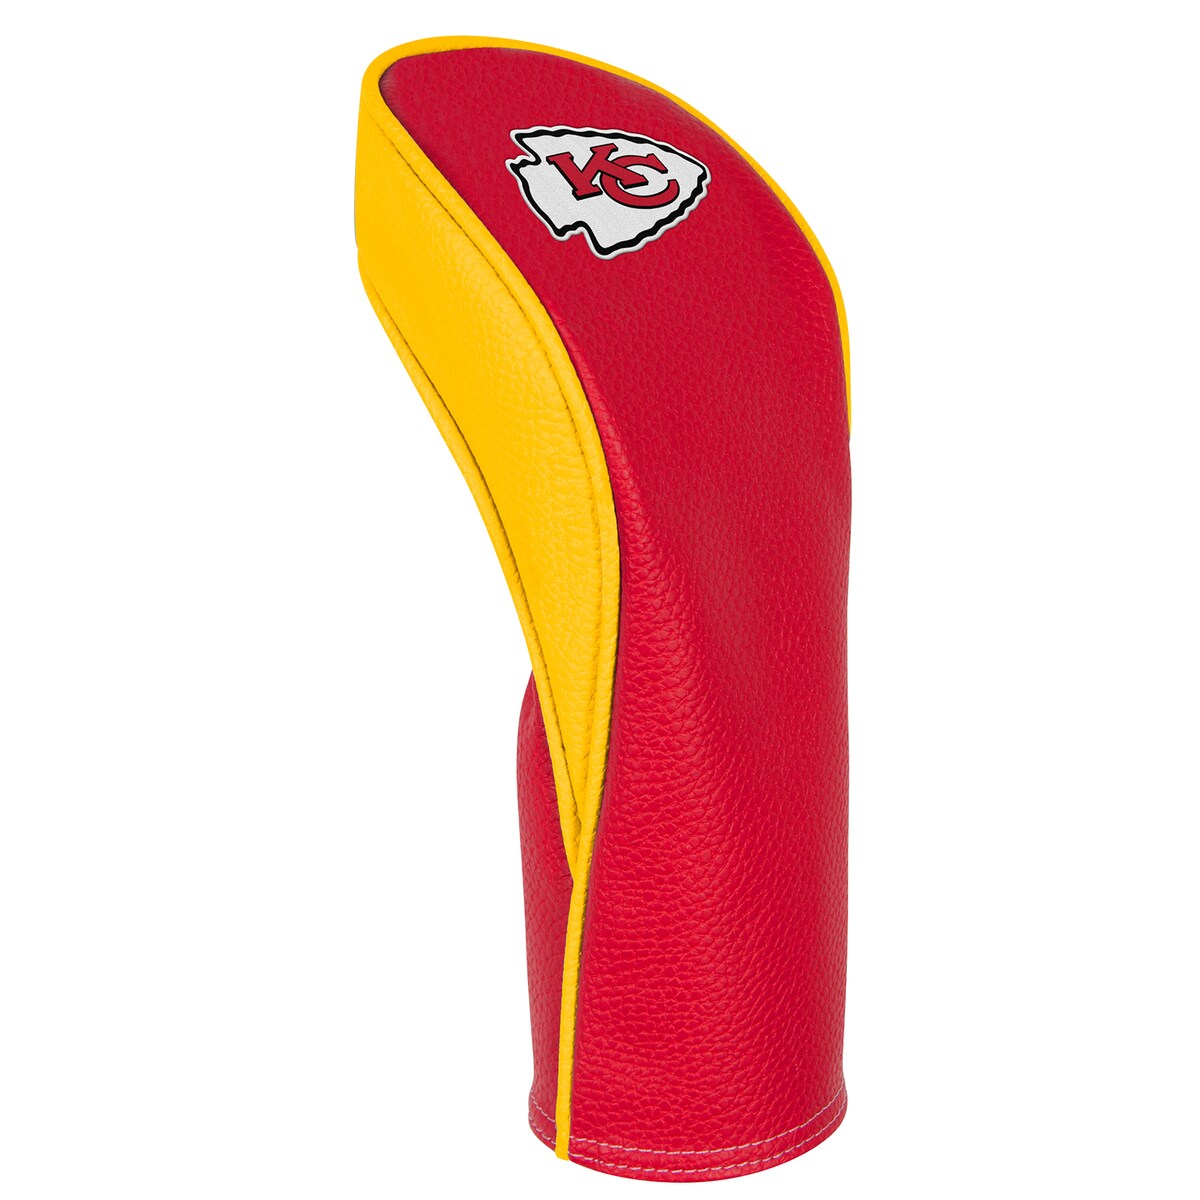 Cover your 3, 4 or 5 wood golf club in Kansas City Chiefs spirit with this WinCraft Fairway headcover made out of durable nylon in team colors.Corresponding woven tagOfficially licensedImportedEmbroidered graphicsBrand: WinCraftMaterial: 100% NylonFits 3, 4 or 5 woodConstructed of durable 420D nylon